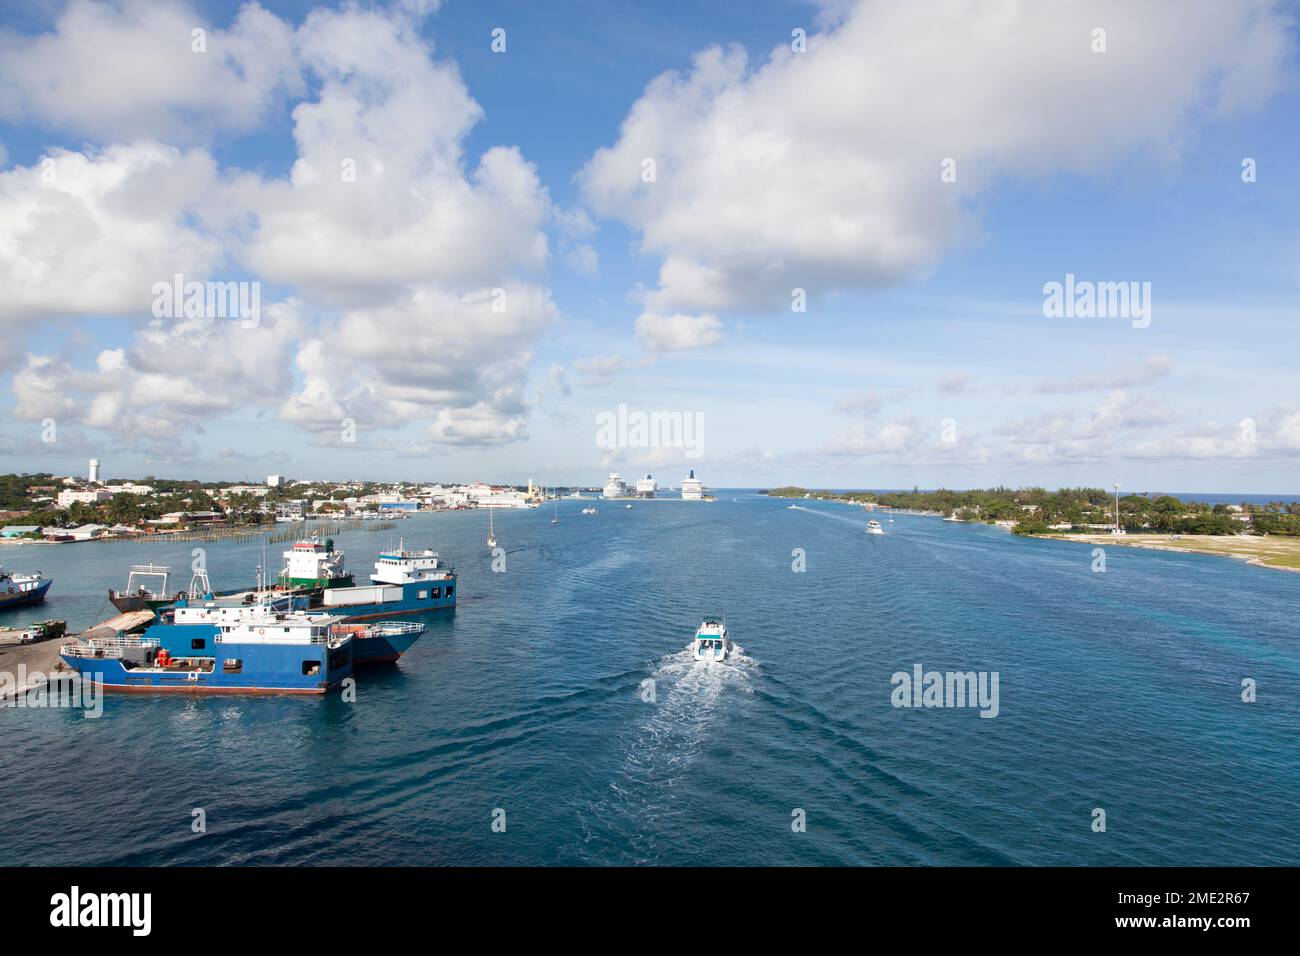 The View From The Bridge Of Nassau City And Paradise Island With Nassau Harbour In The Middle